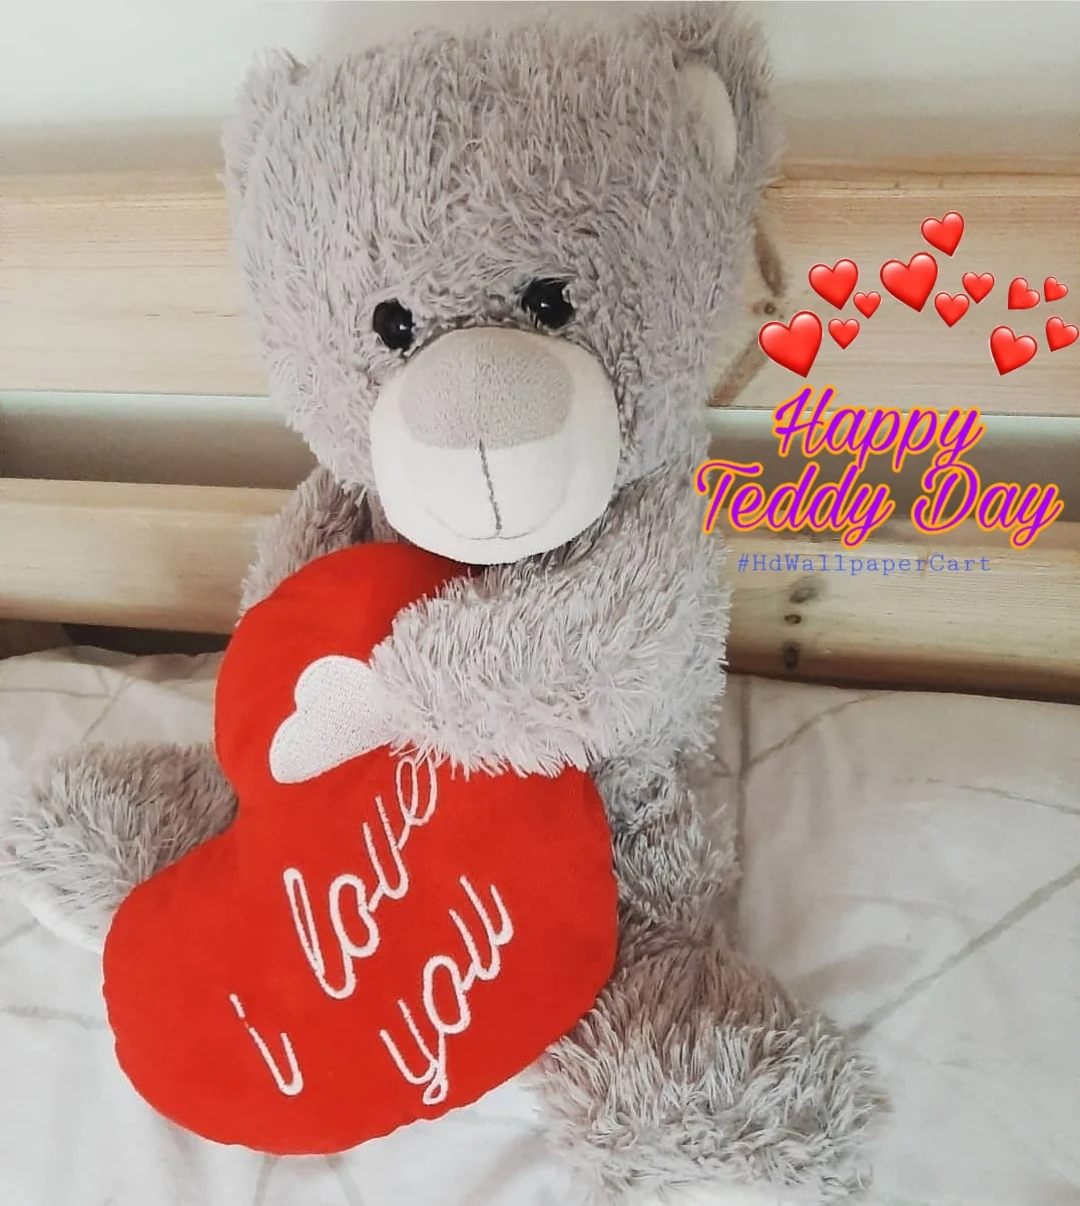 Teddy Day Wish Images for Girlfriend